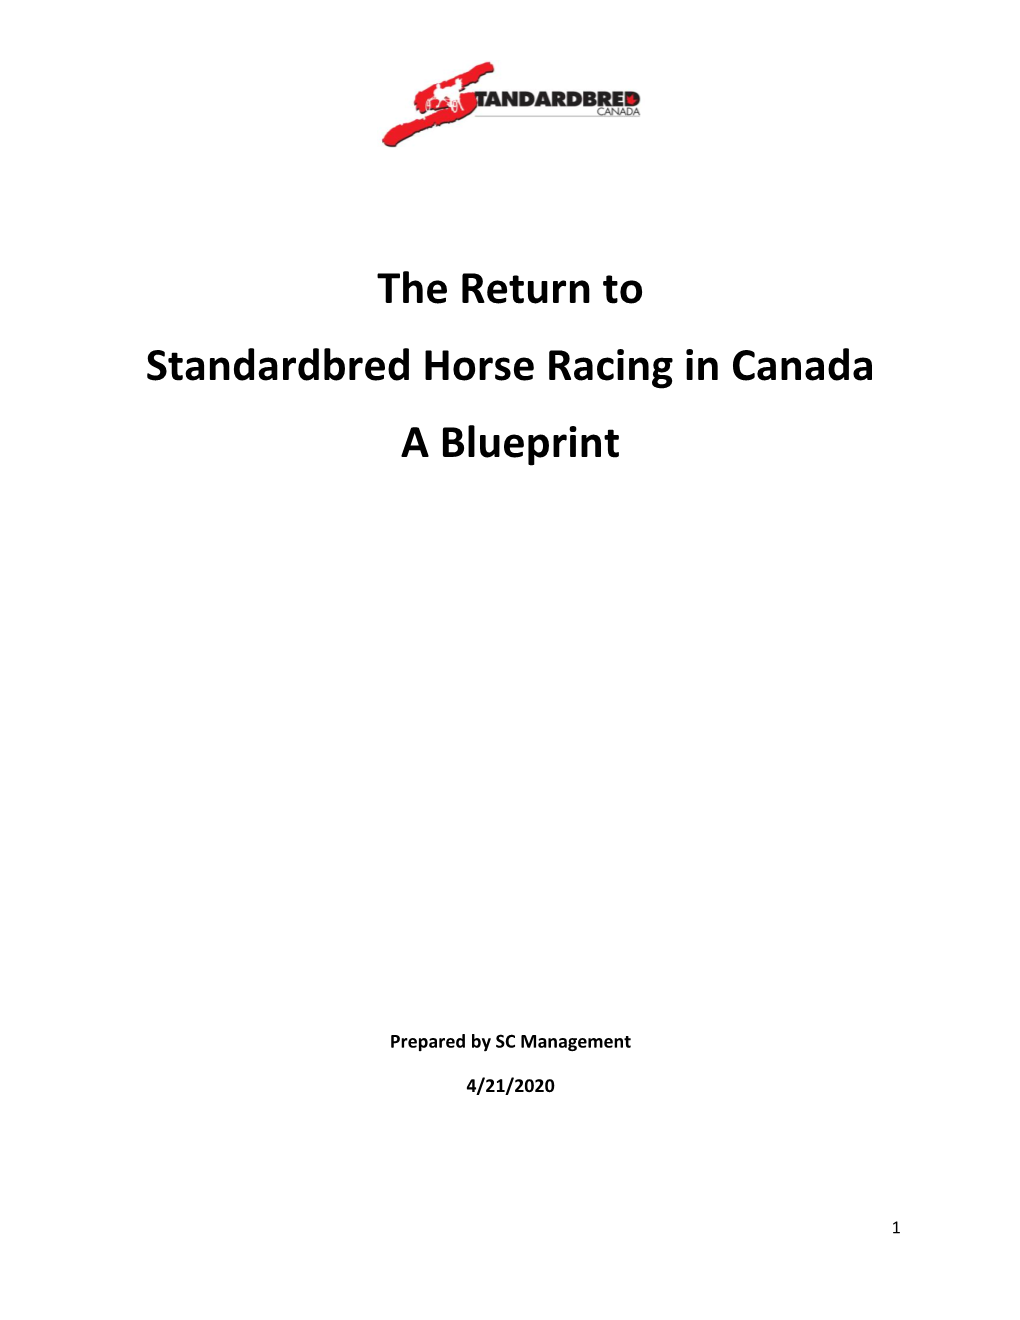 The Return to Standardbred Horse Racing in Canada a Blueprint